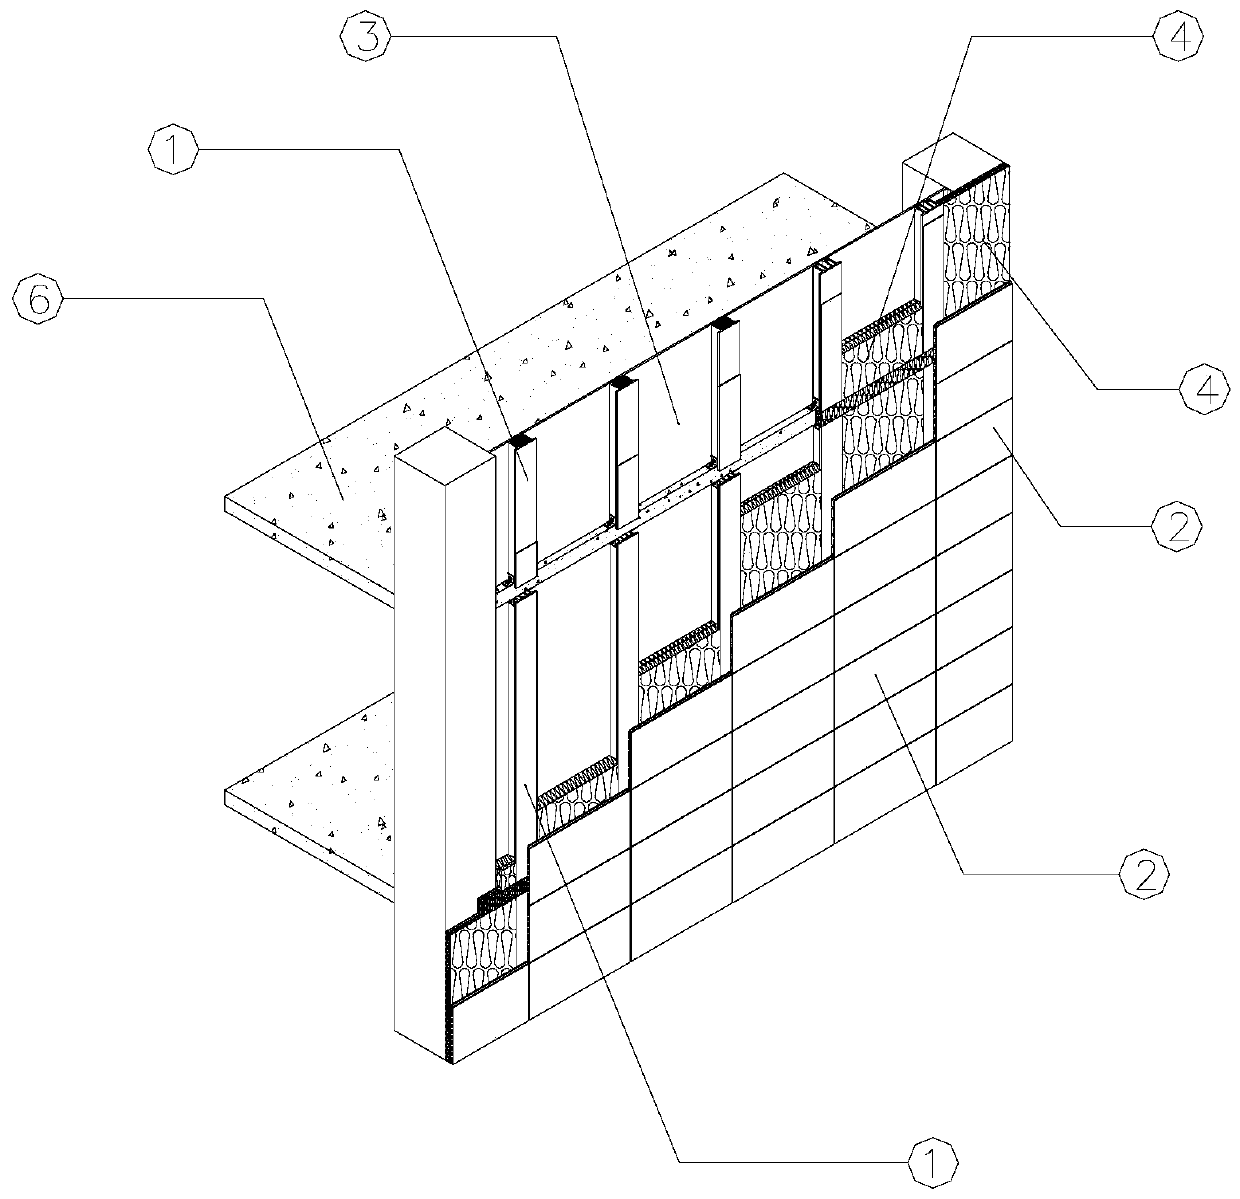 Inorganic keel purline assembly external wall and assembly method